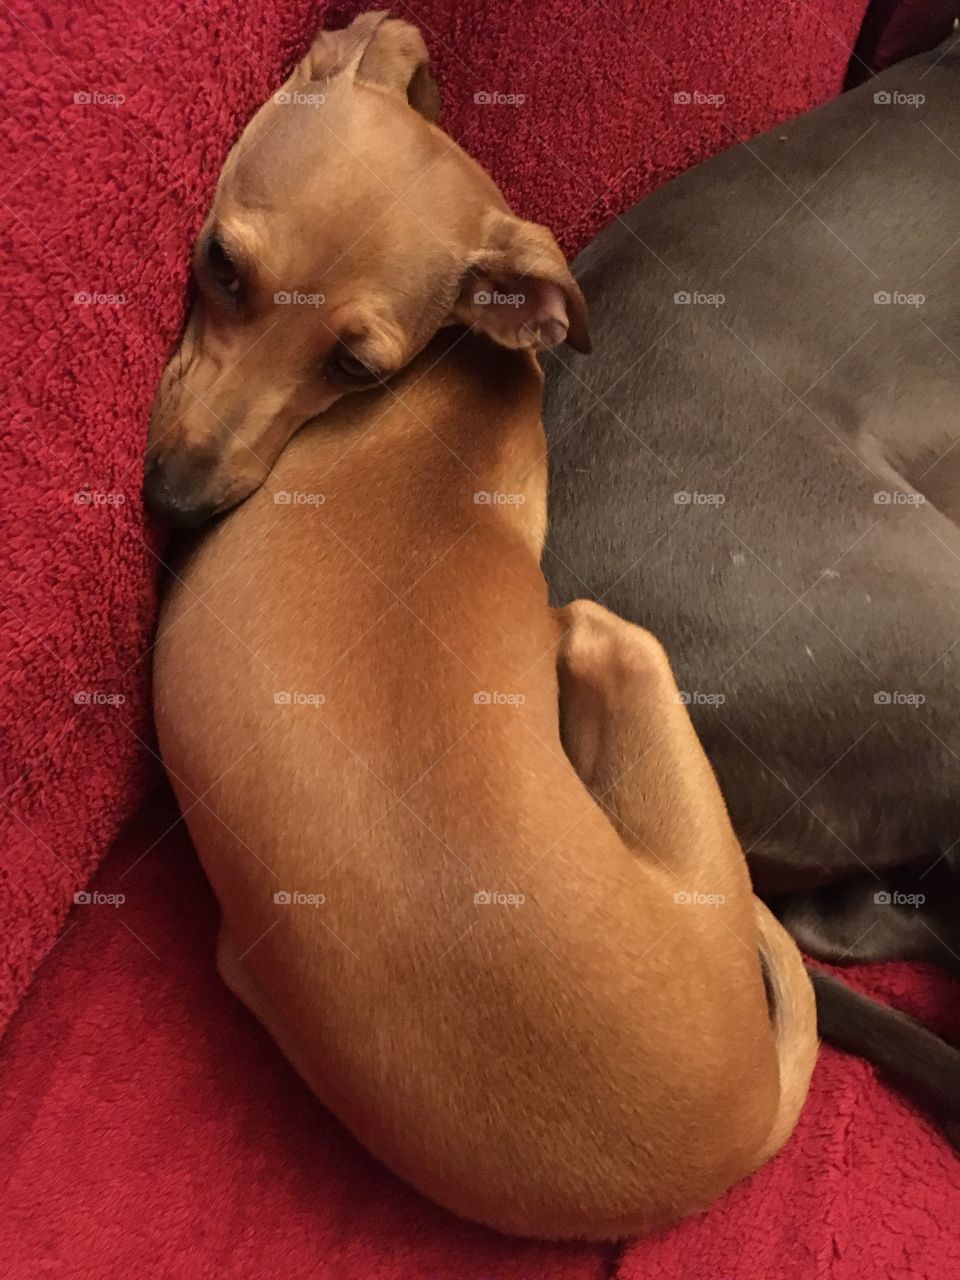 Amber the silly Italian greyhound puppy sat twisted and contorted in the sofa against a whippet